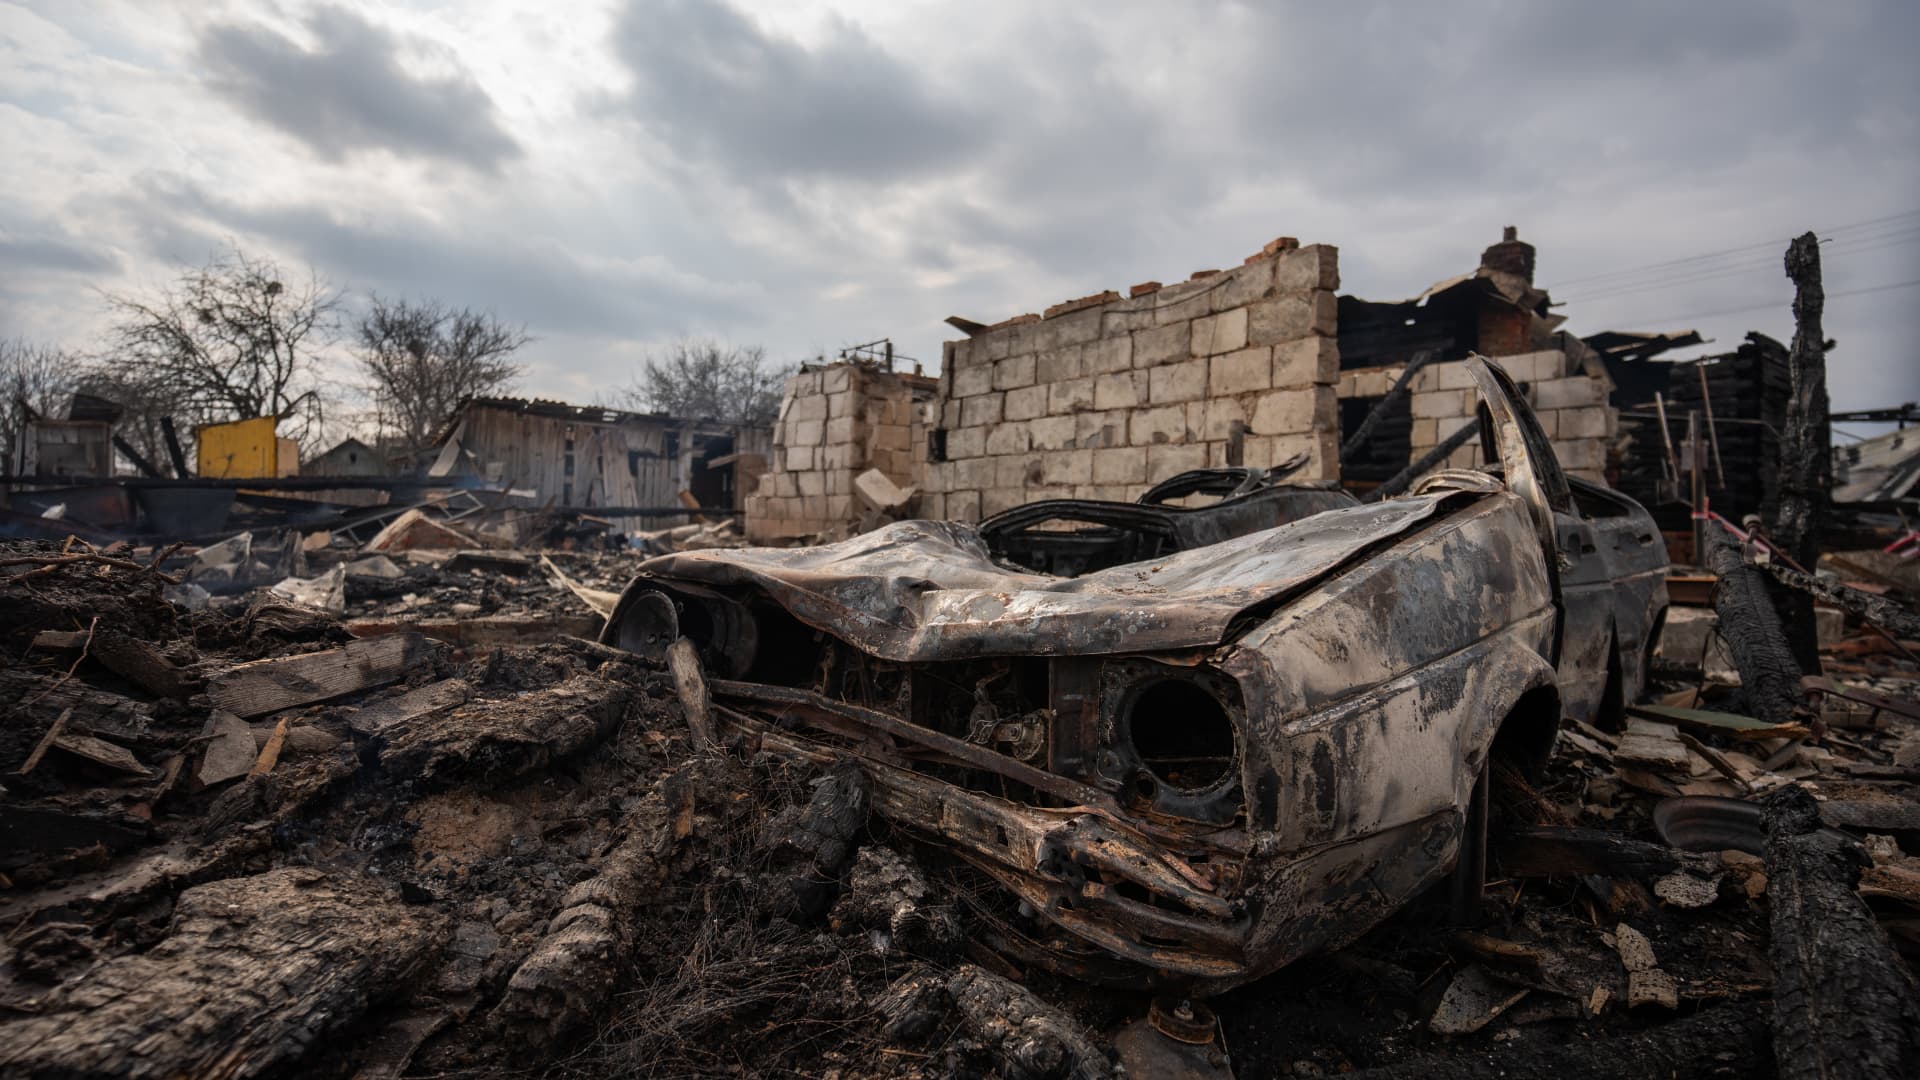 The wreckage of a car is seen amid rubble and debris at a house of the Kriazh family destroyed by Russian shelling on March 17, 2024 in Makyshyn, Chernihiv Oblast, Ukraine.